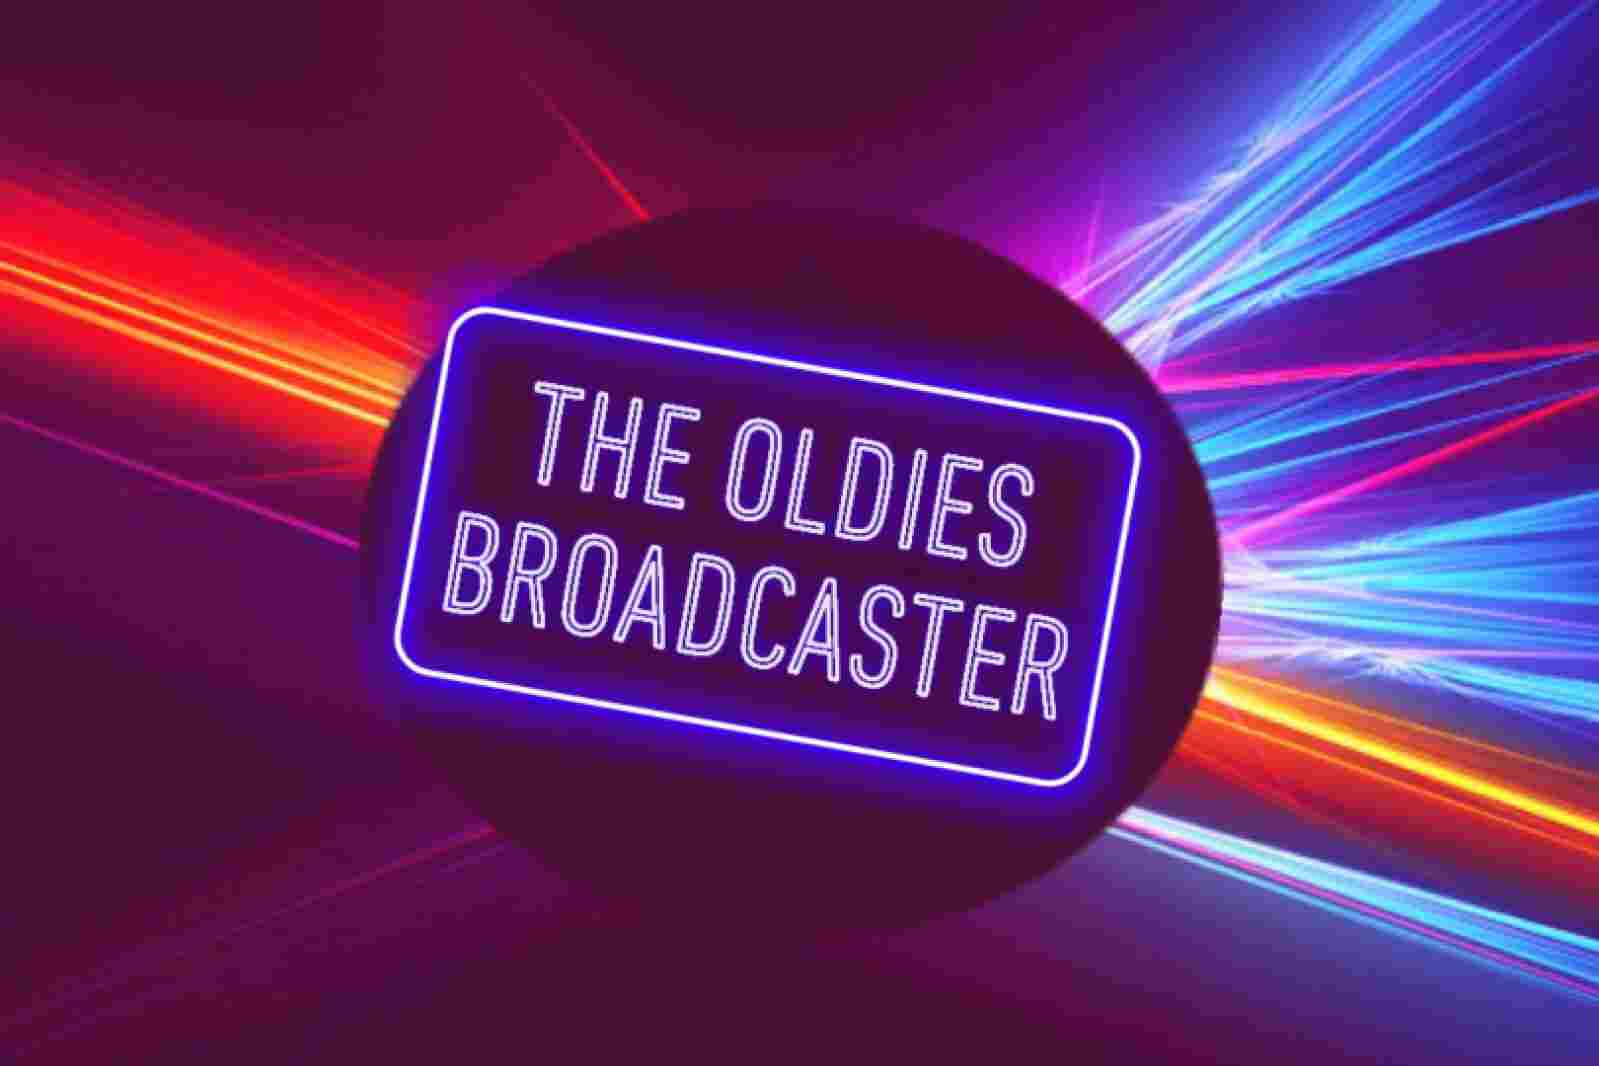 The Oldies Broadcaster UK